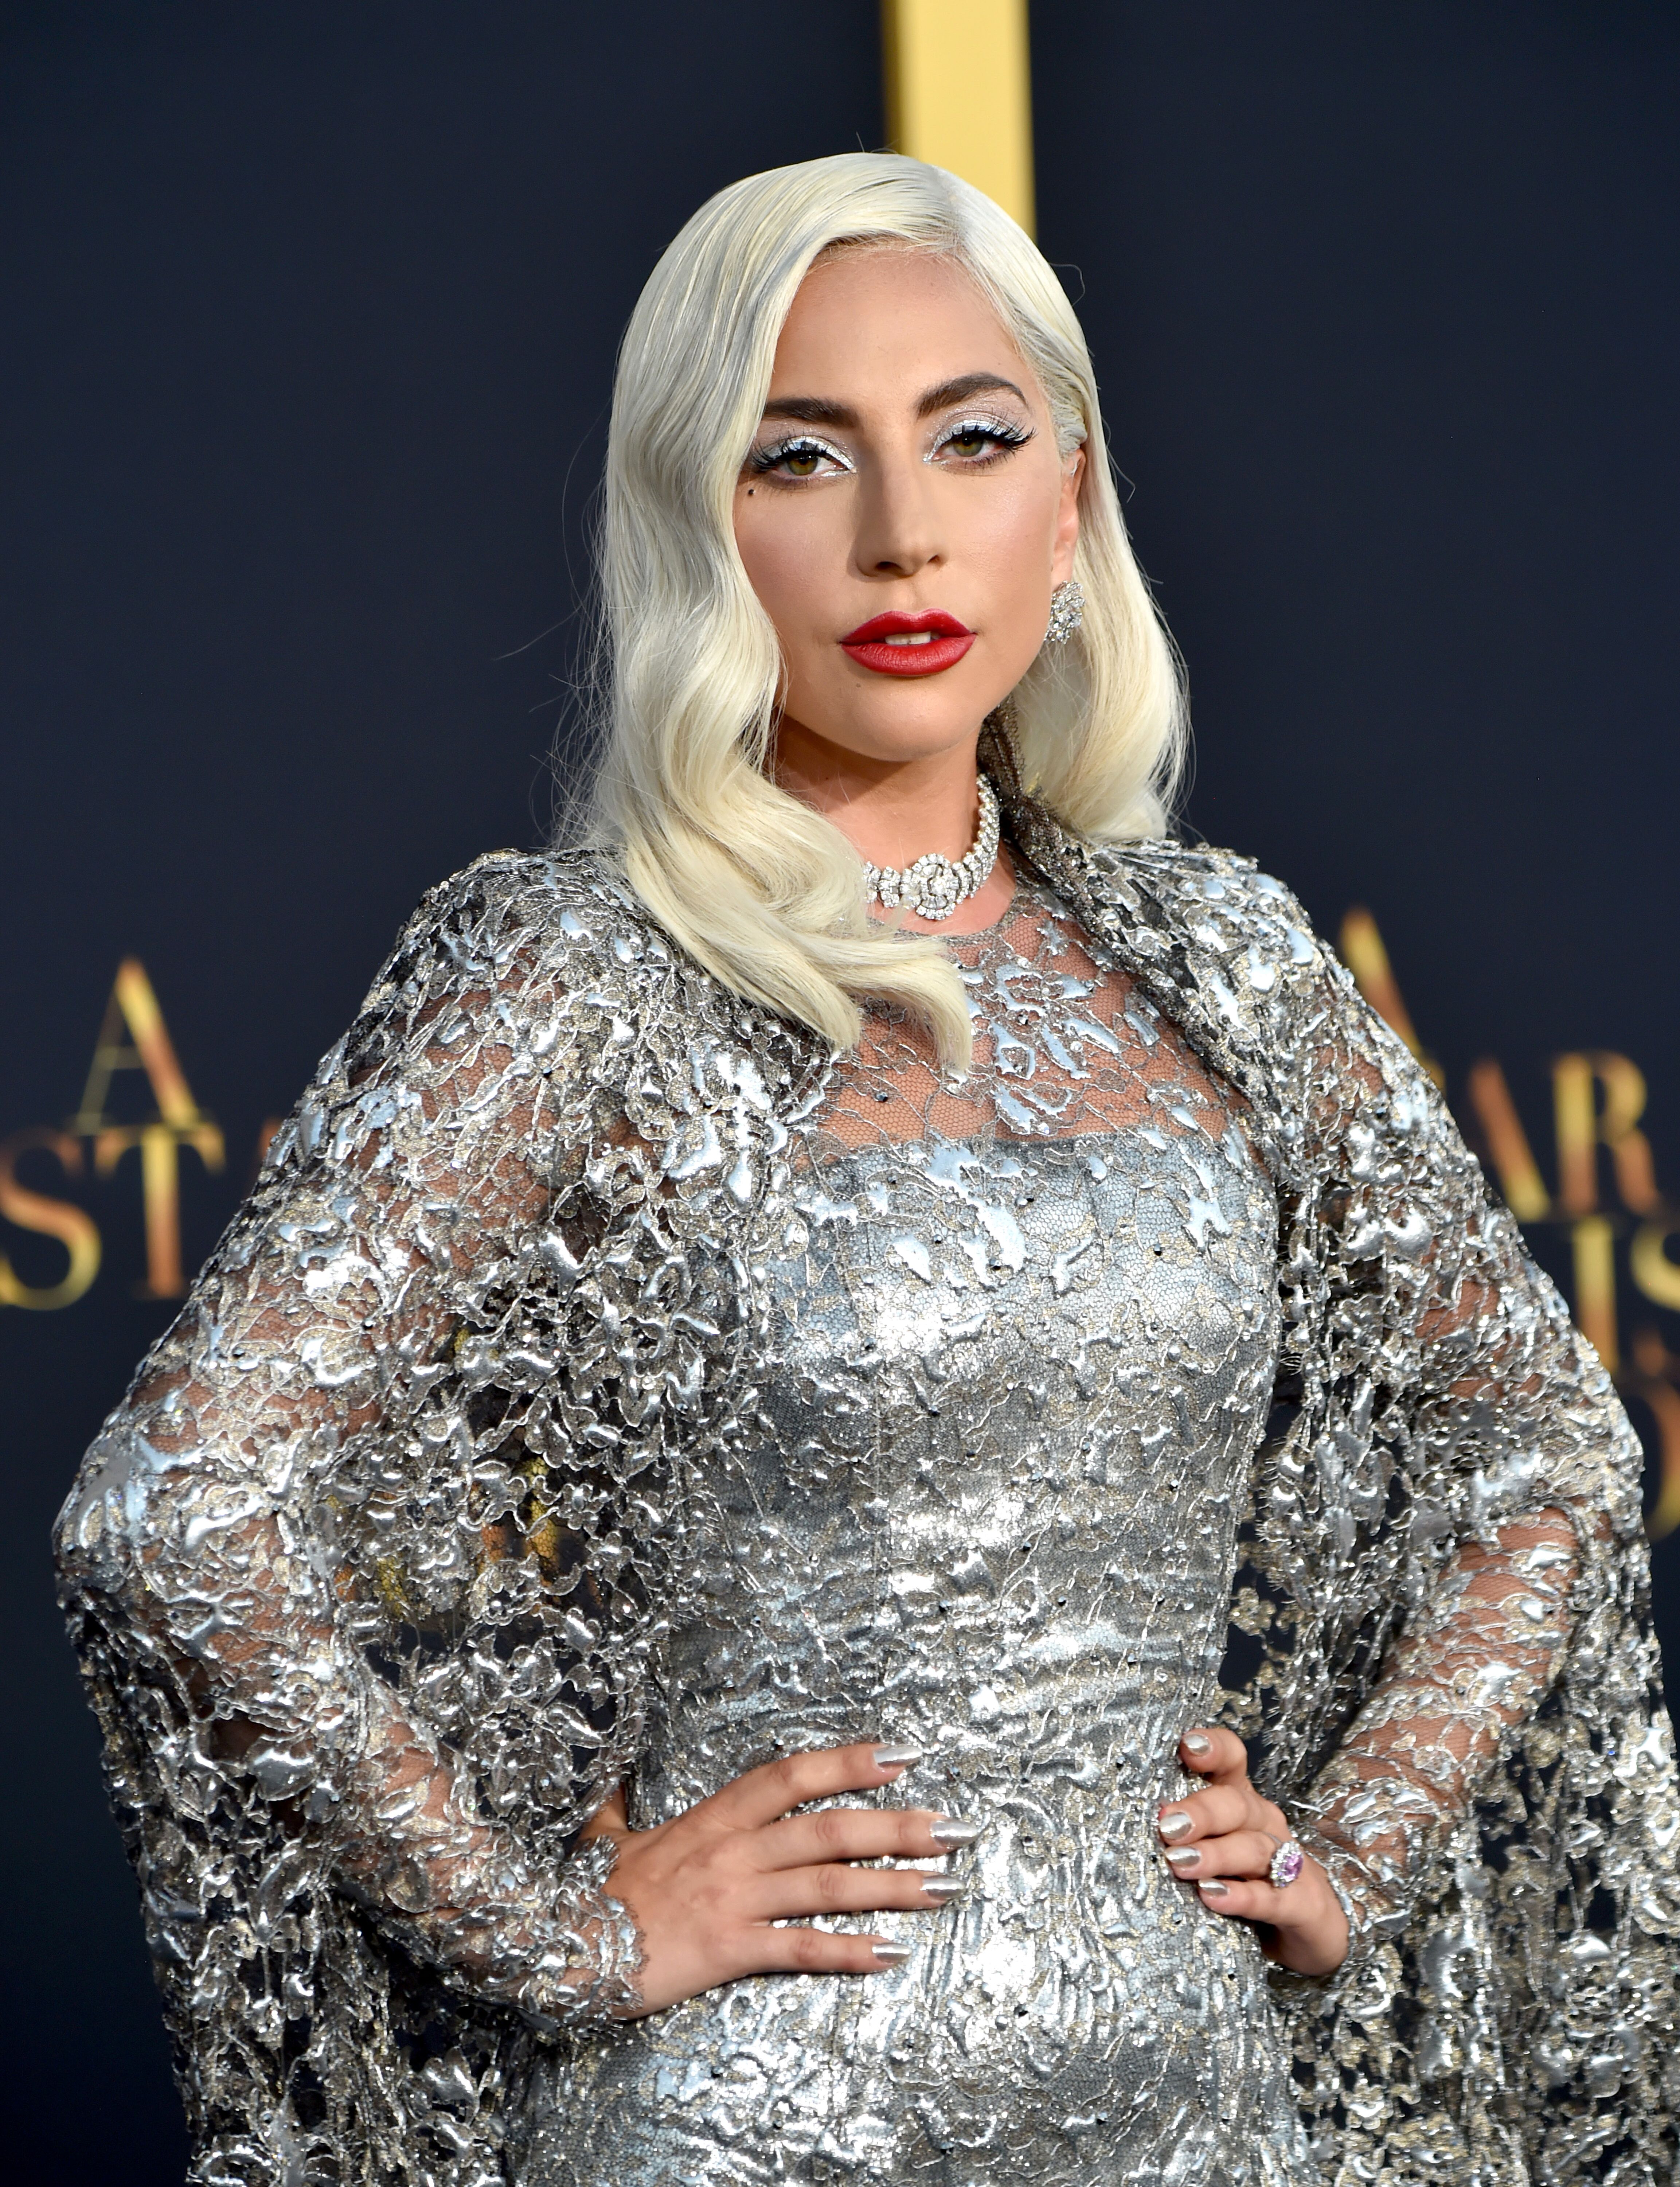 Lady Gaga at the premiere of "A Star Is Born" at The Shrine Auditorium on September 24, 2018, in Los Angeles, California | Photo: Getty Images